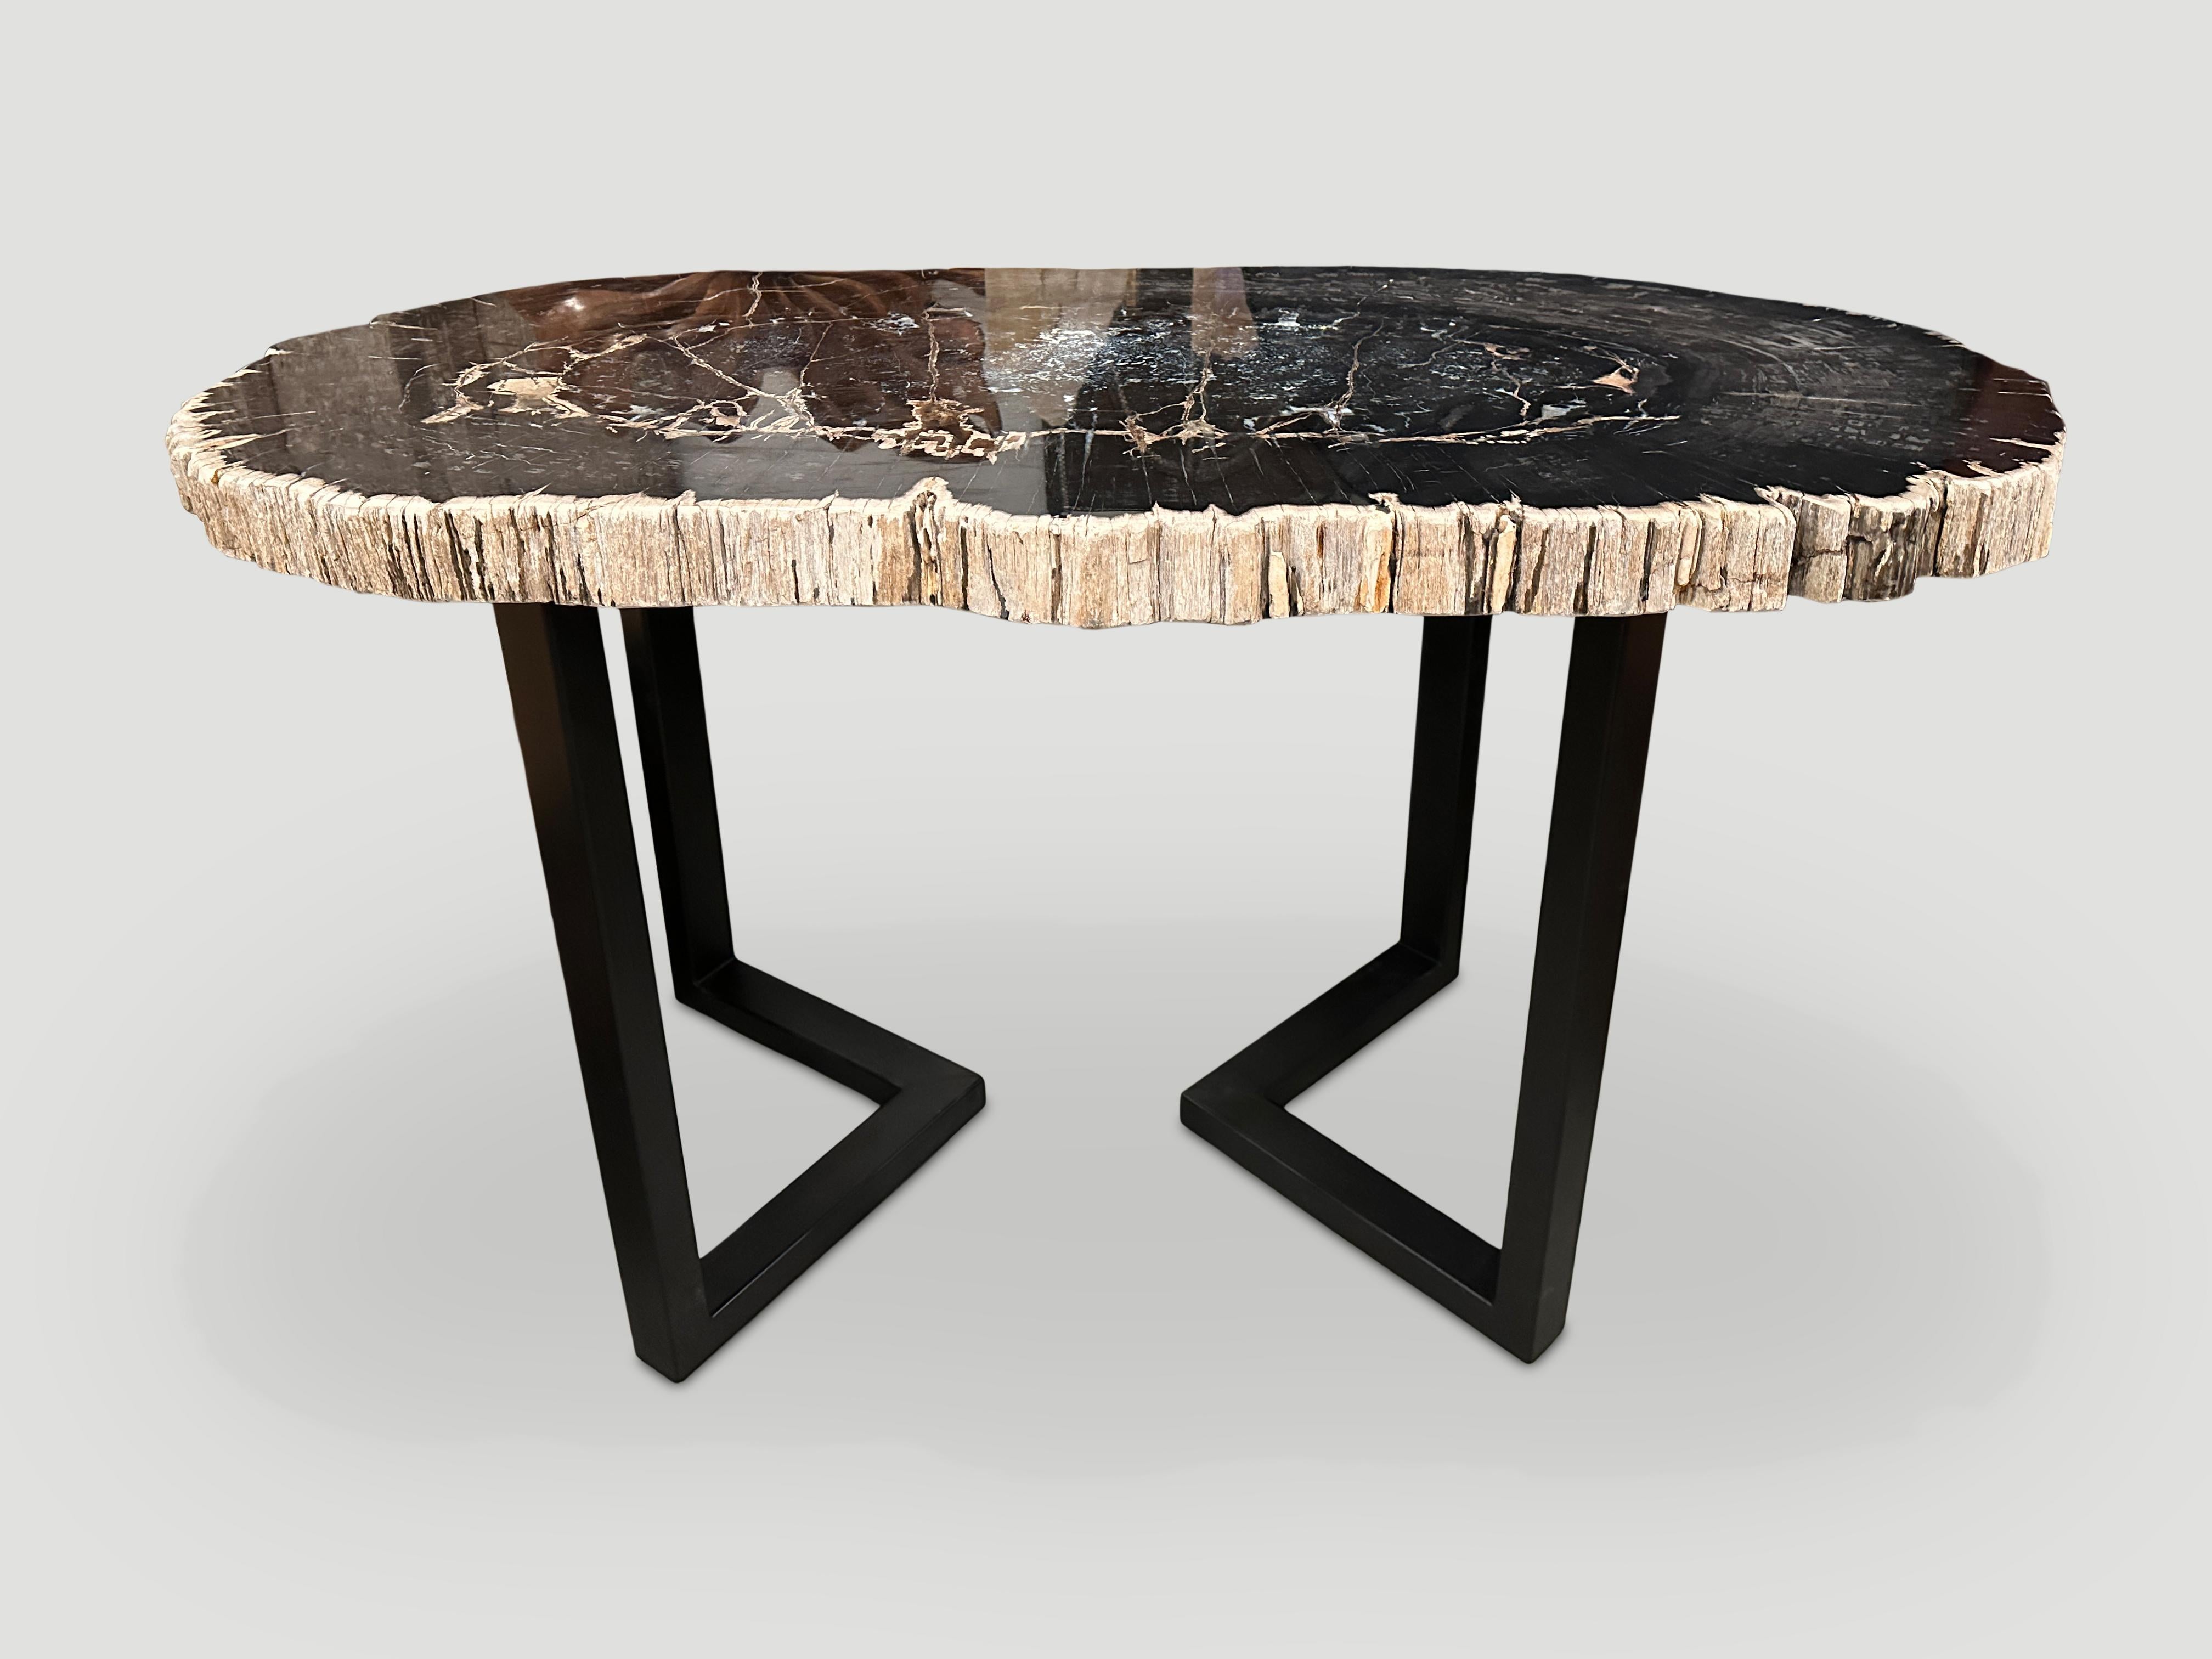 Metal Andrianna Shamaris Magnificent Large Petrified Wood Table For Sale